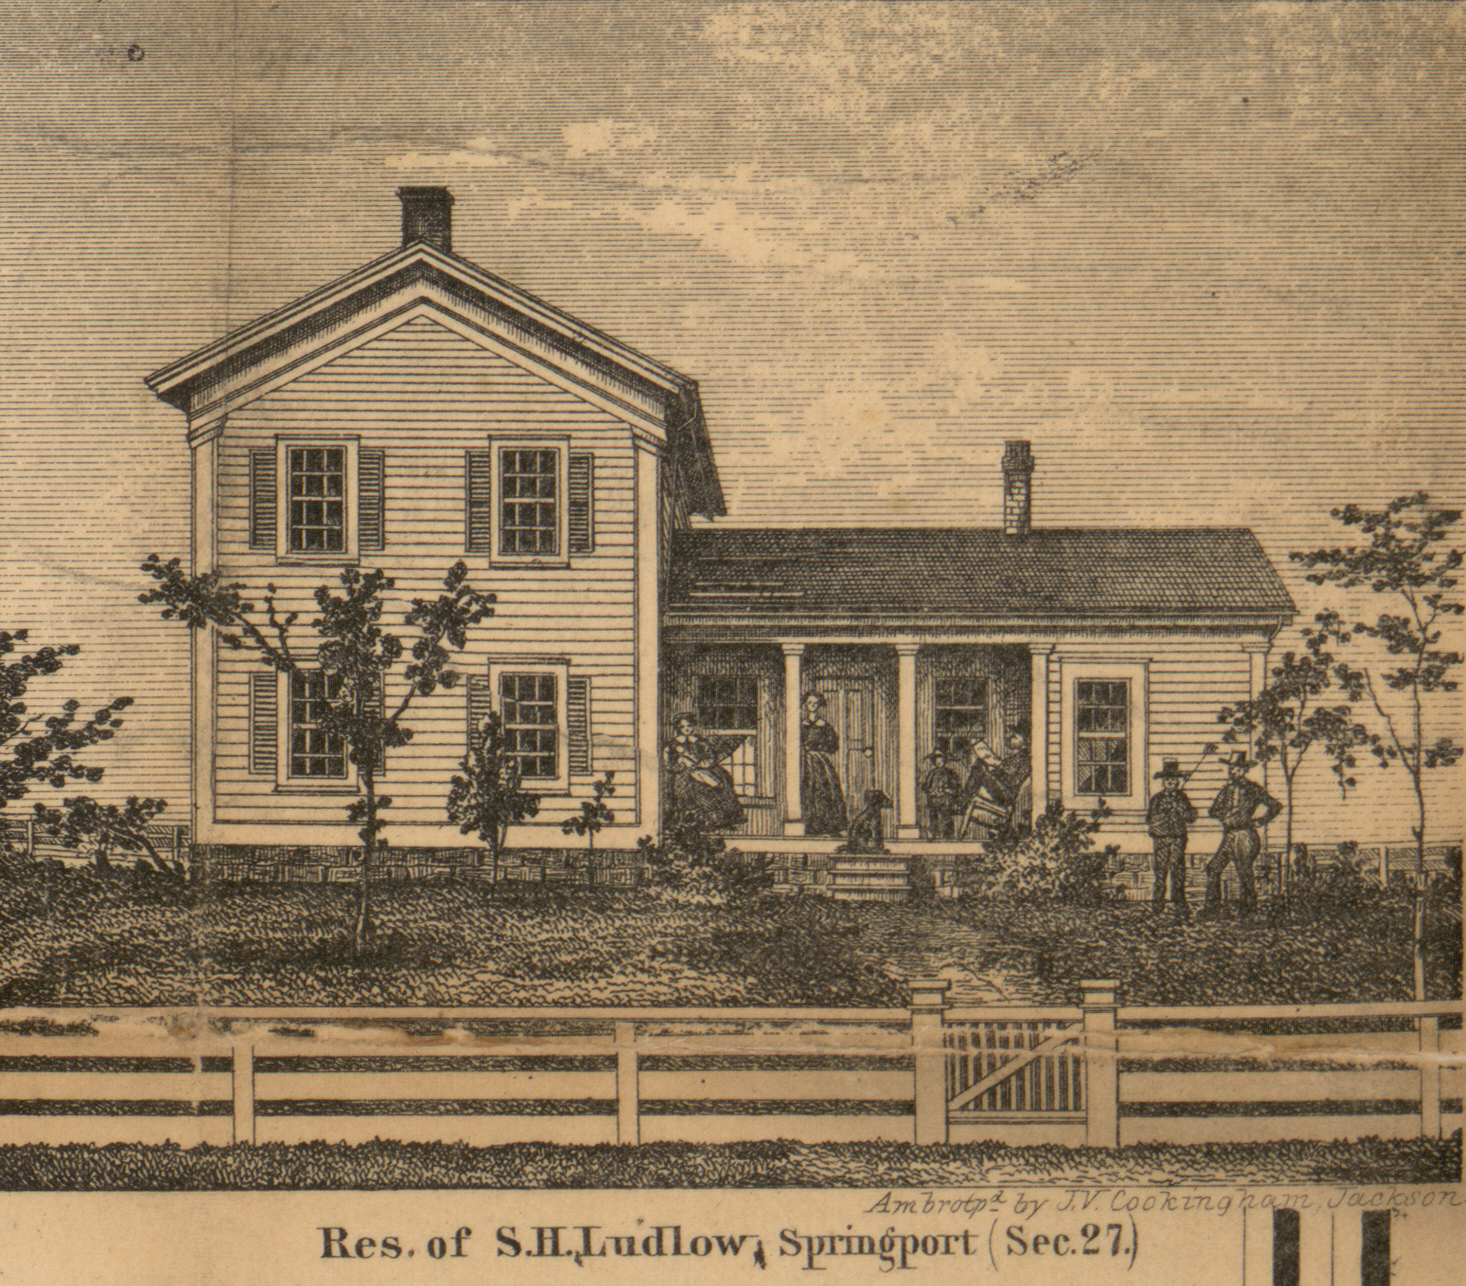 Residence, S.H. Ludlow, Section 27, Springport, Jackson 1858